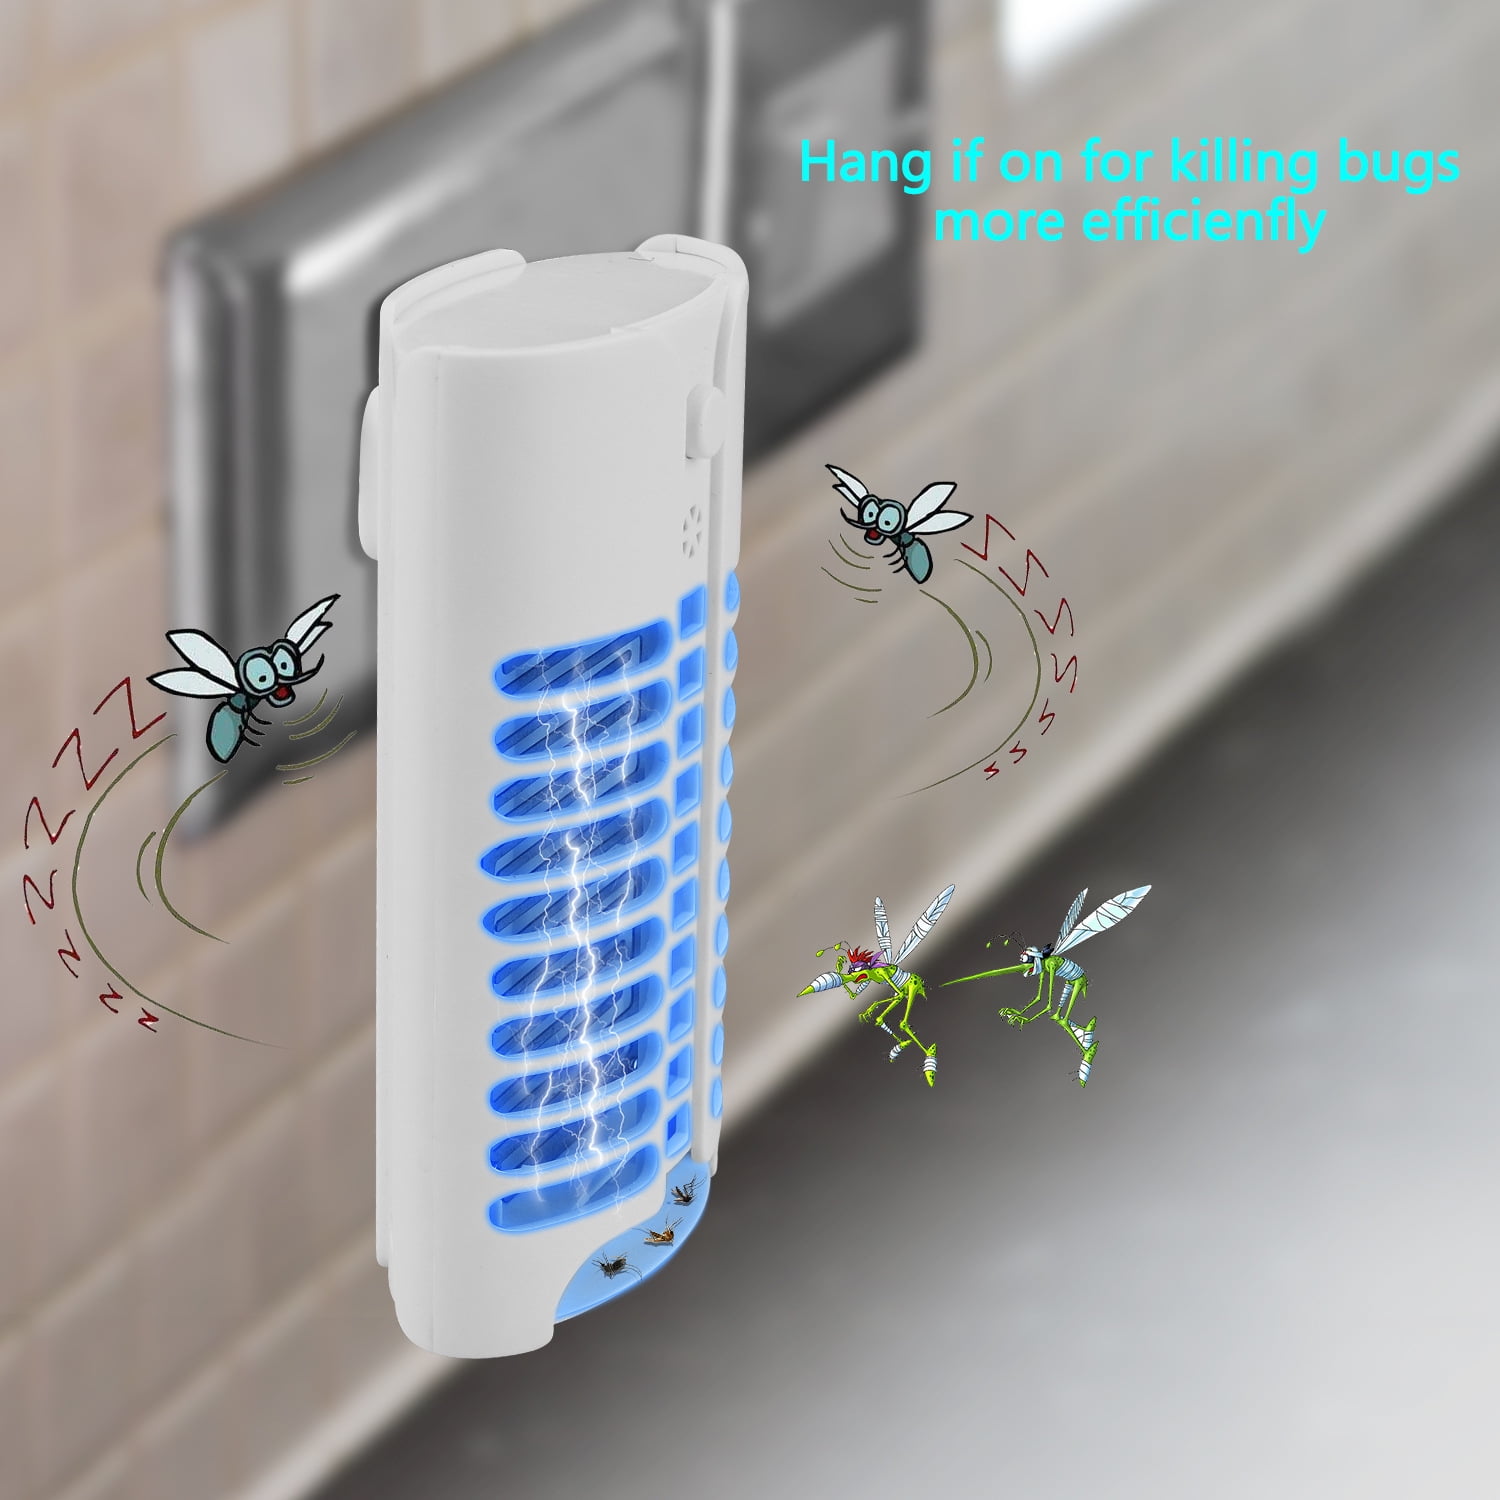 LED Mosquito Killers With USB Power Adapter Insect Fly Pest Zapper Catcher Trap 